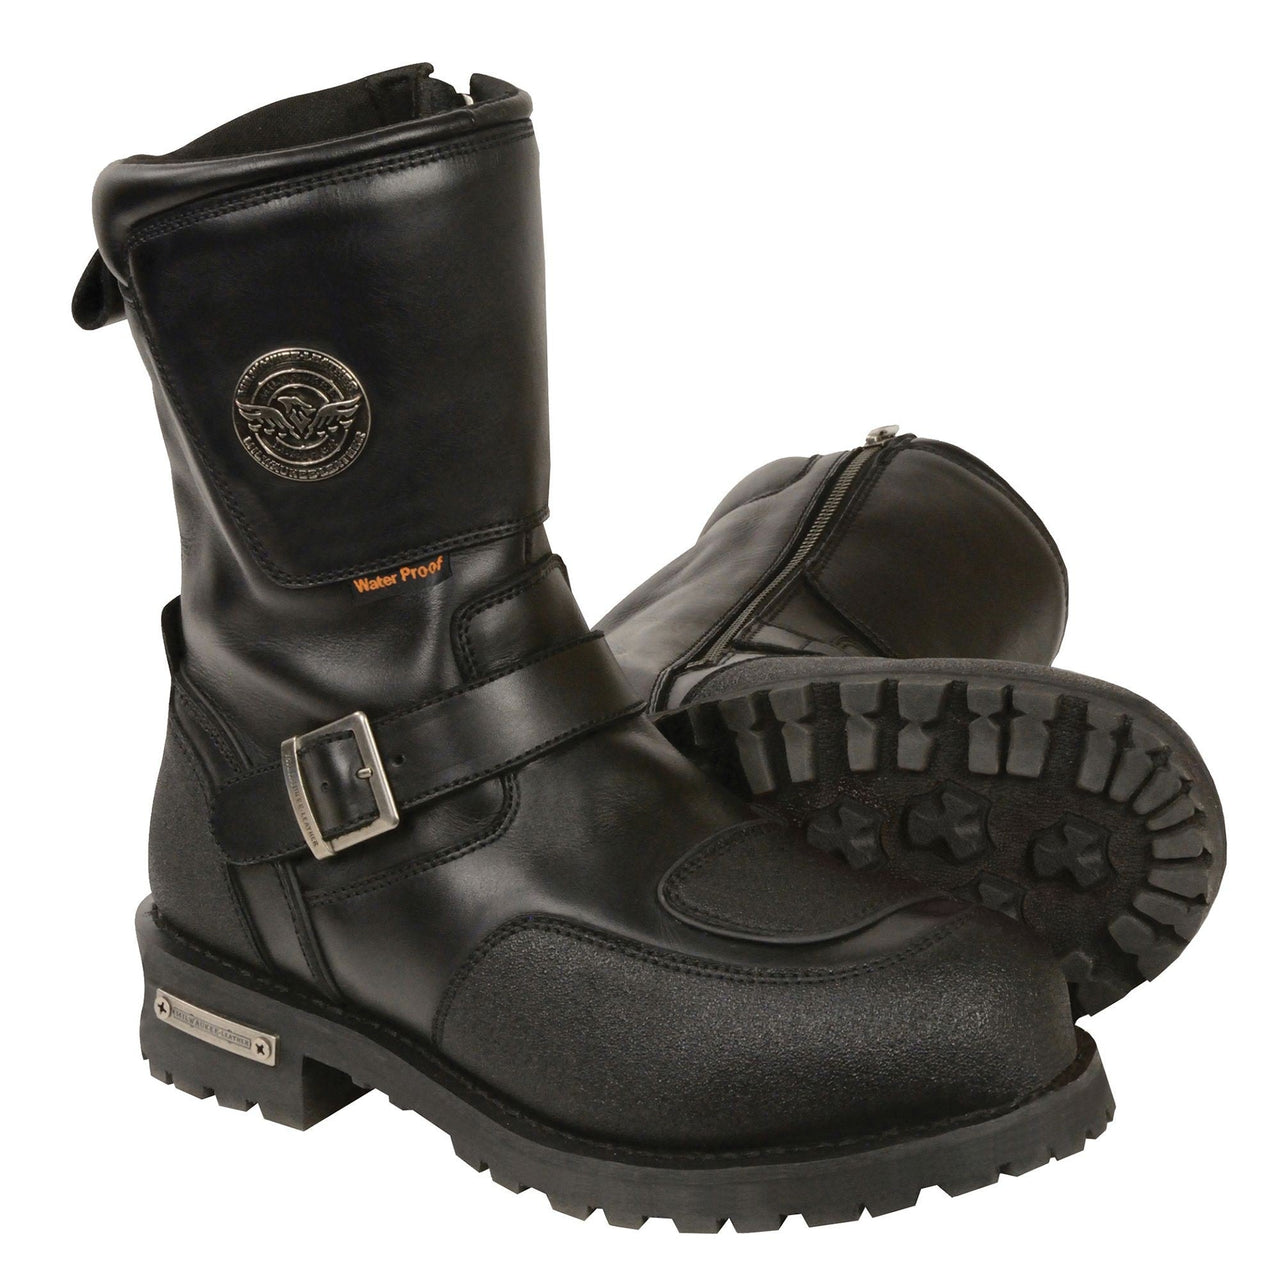 Men's 9" Waterproof Boot w/ Reflective Piping & Gear Shift Protection - HighwayLeather